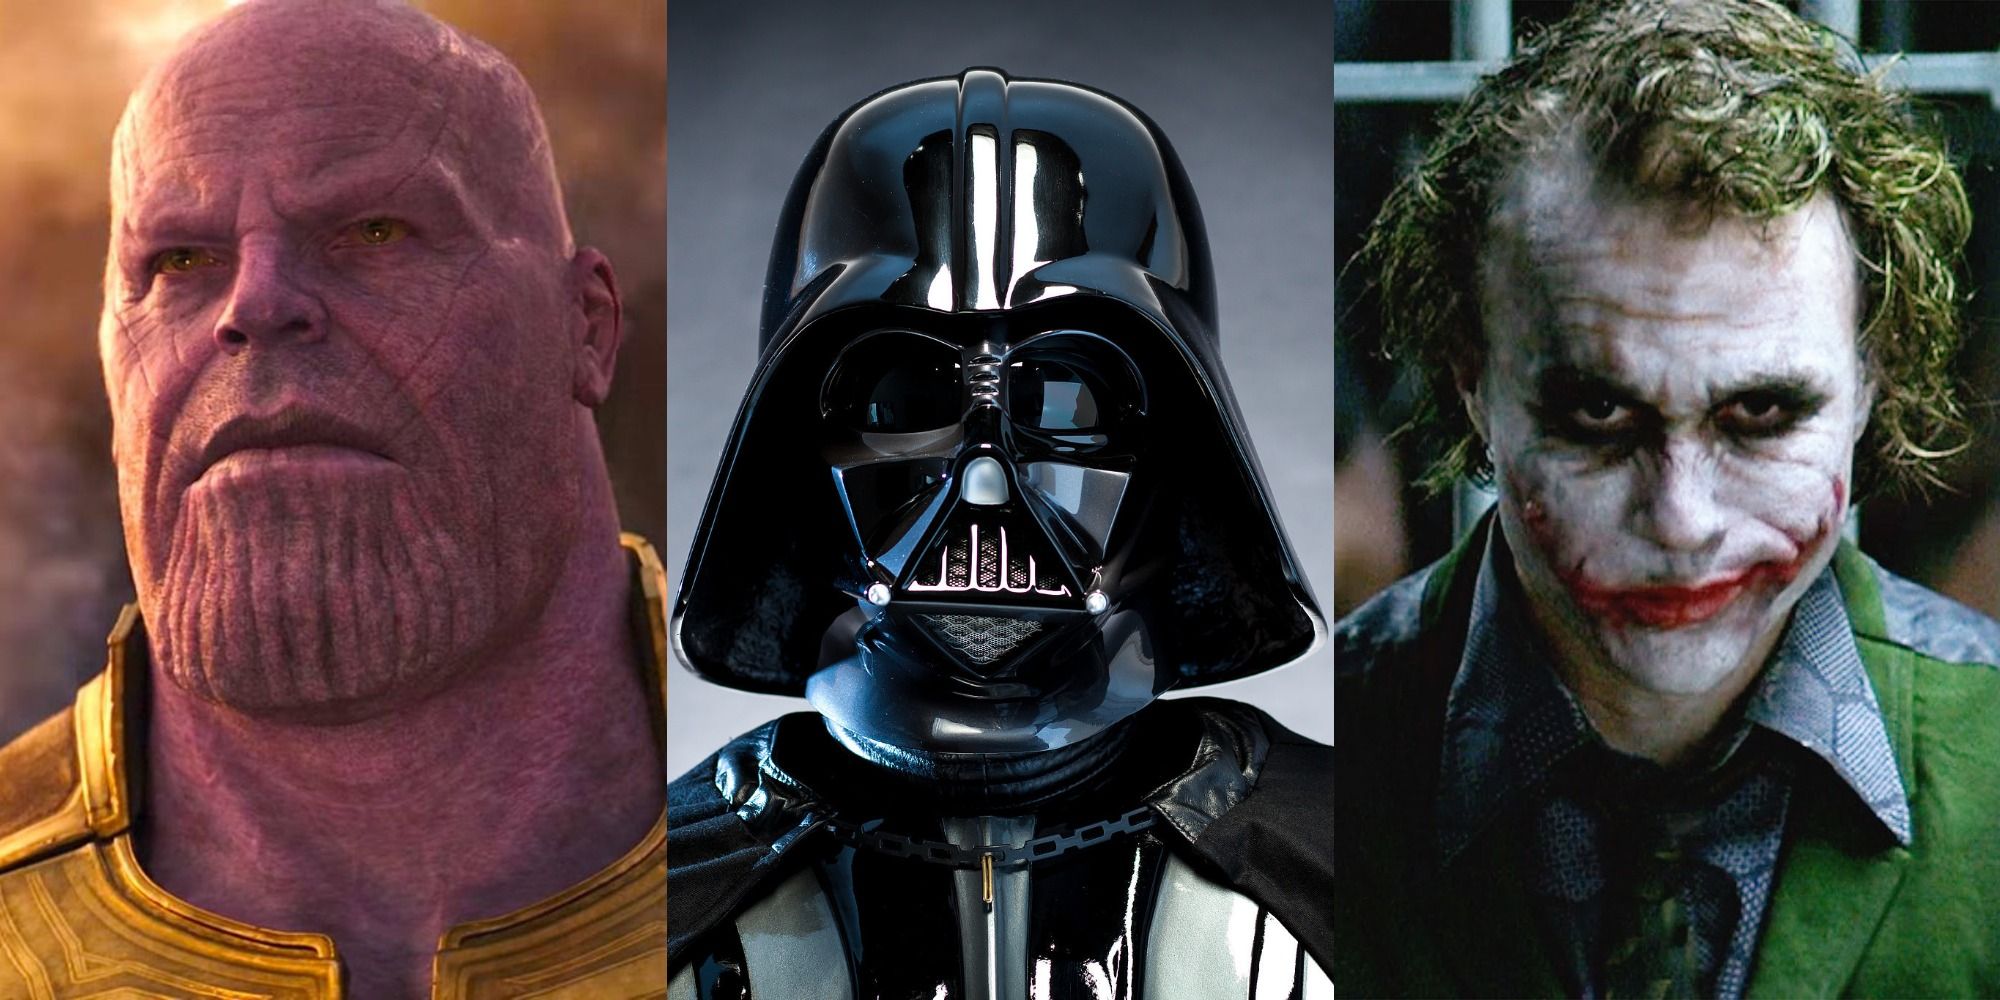 10 Best Movie Villains Of All Time According To Ranker